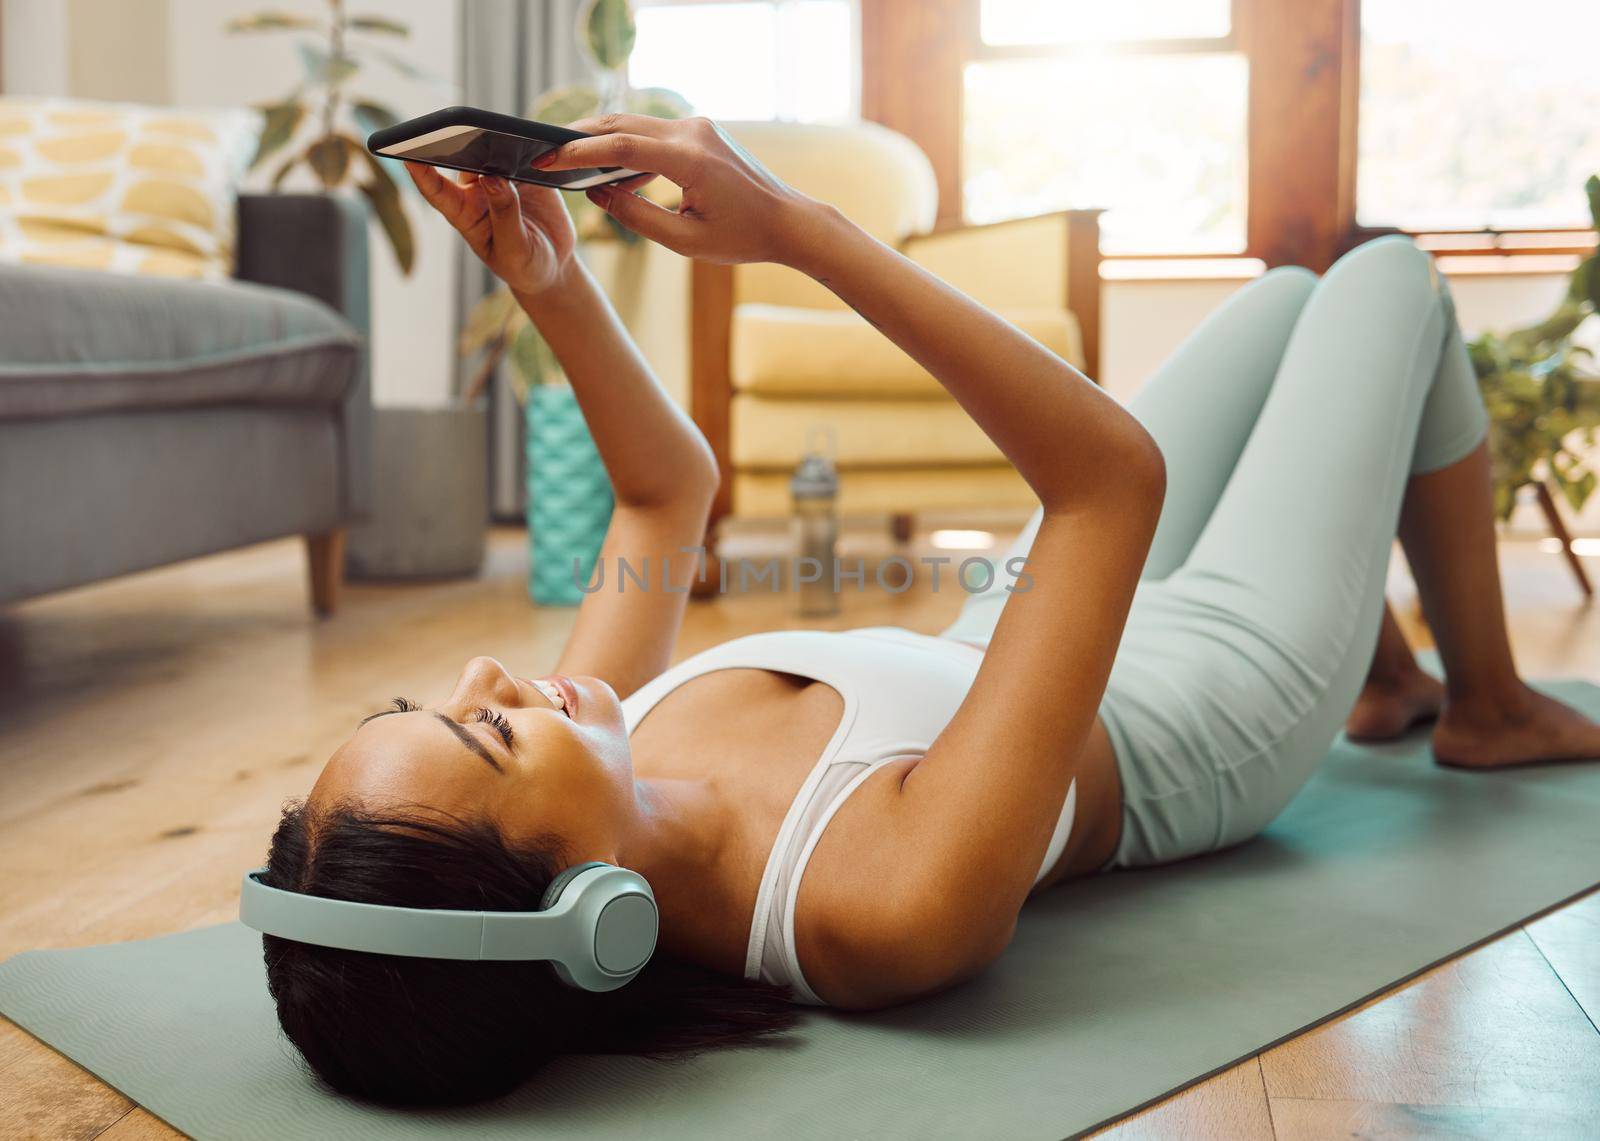 Downloading a few cool songs for her next session. a sporty young woman wearing headphones and using a cellphone while exercising at home. by YuriArcurs